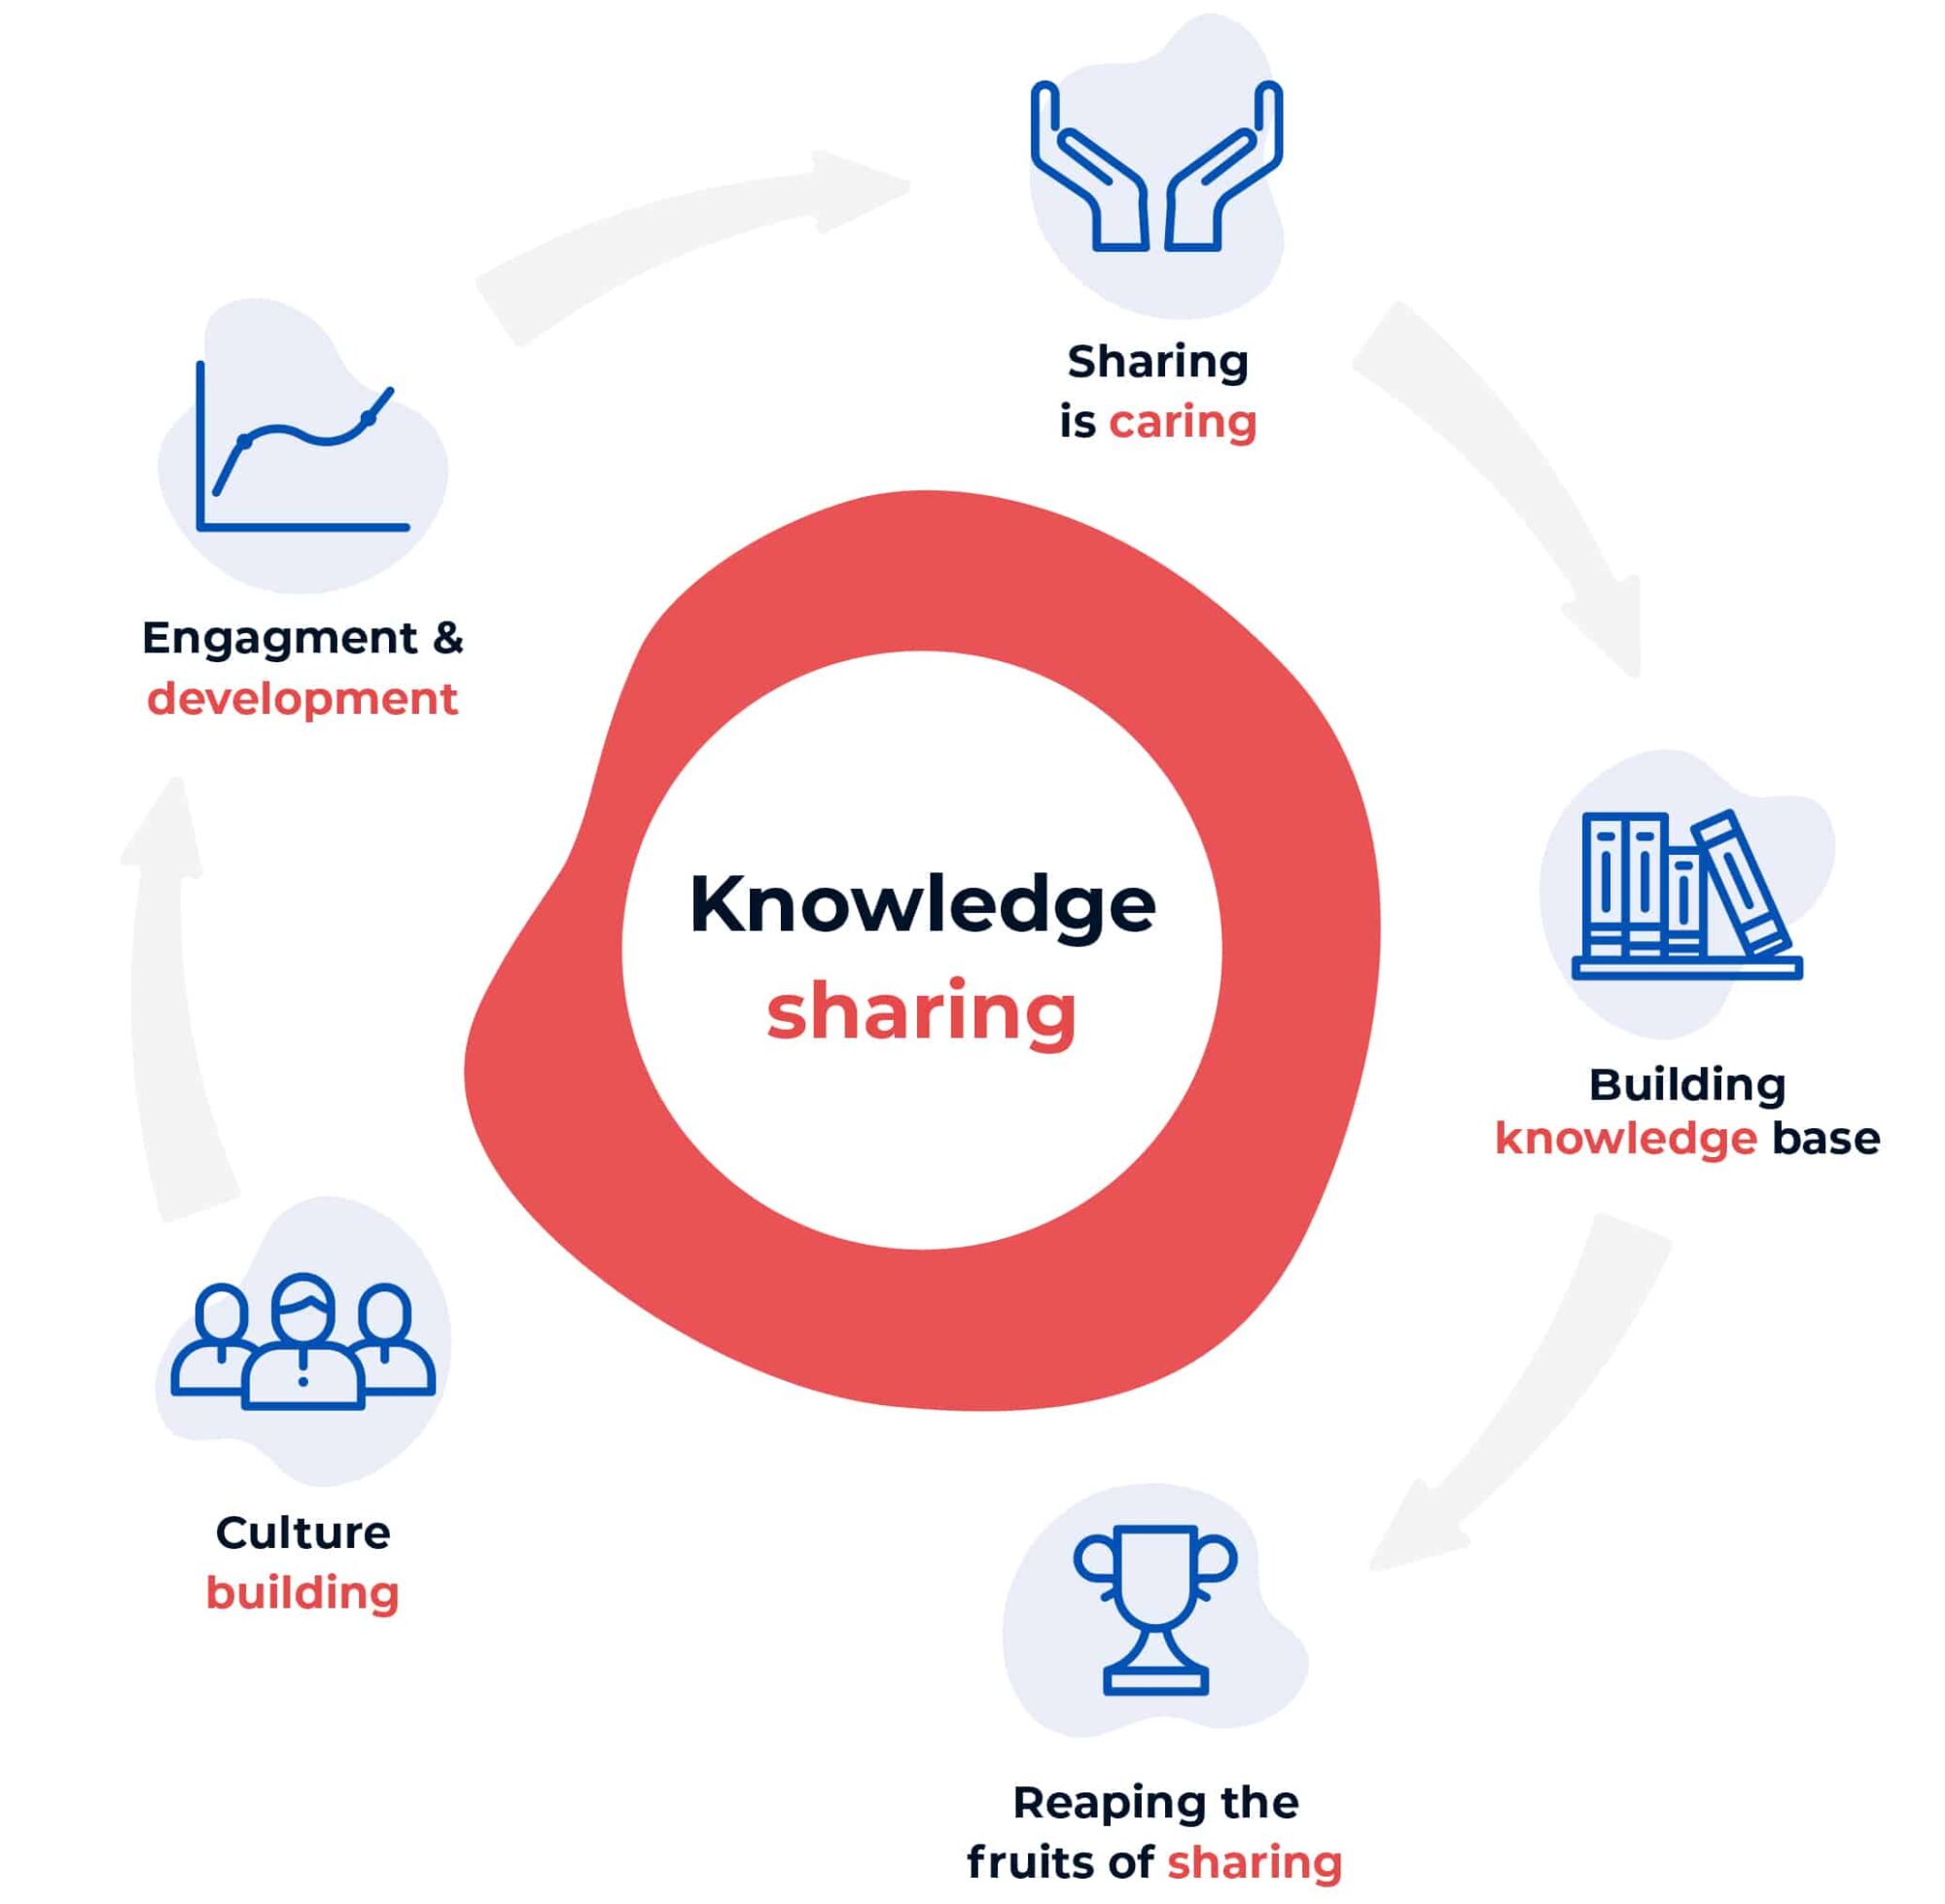 case study of knowledge sharing